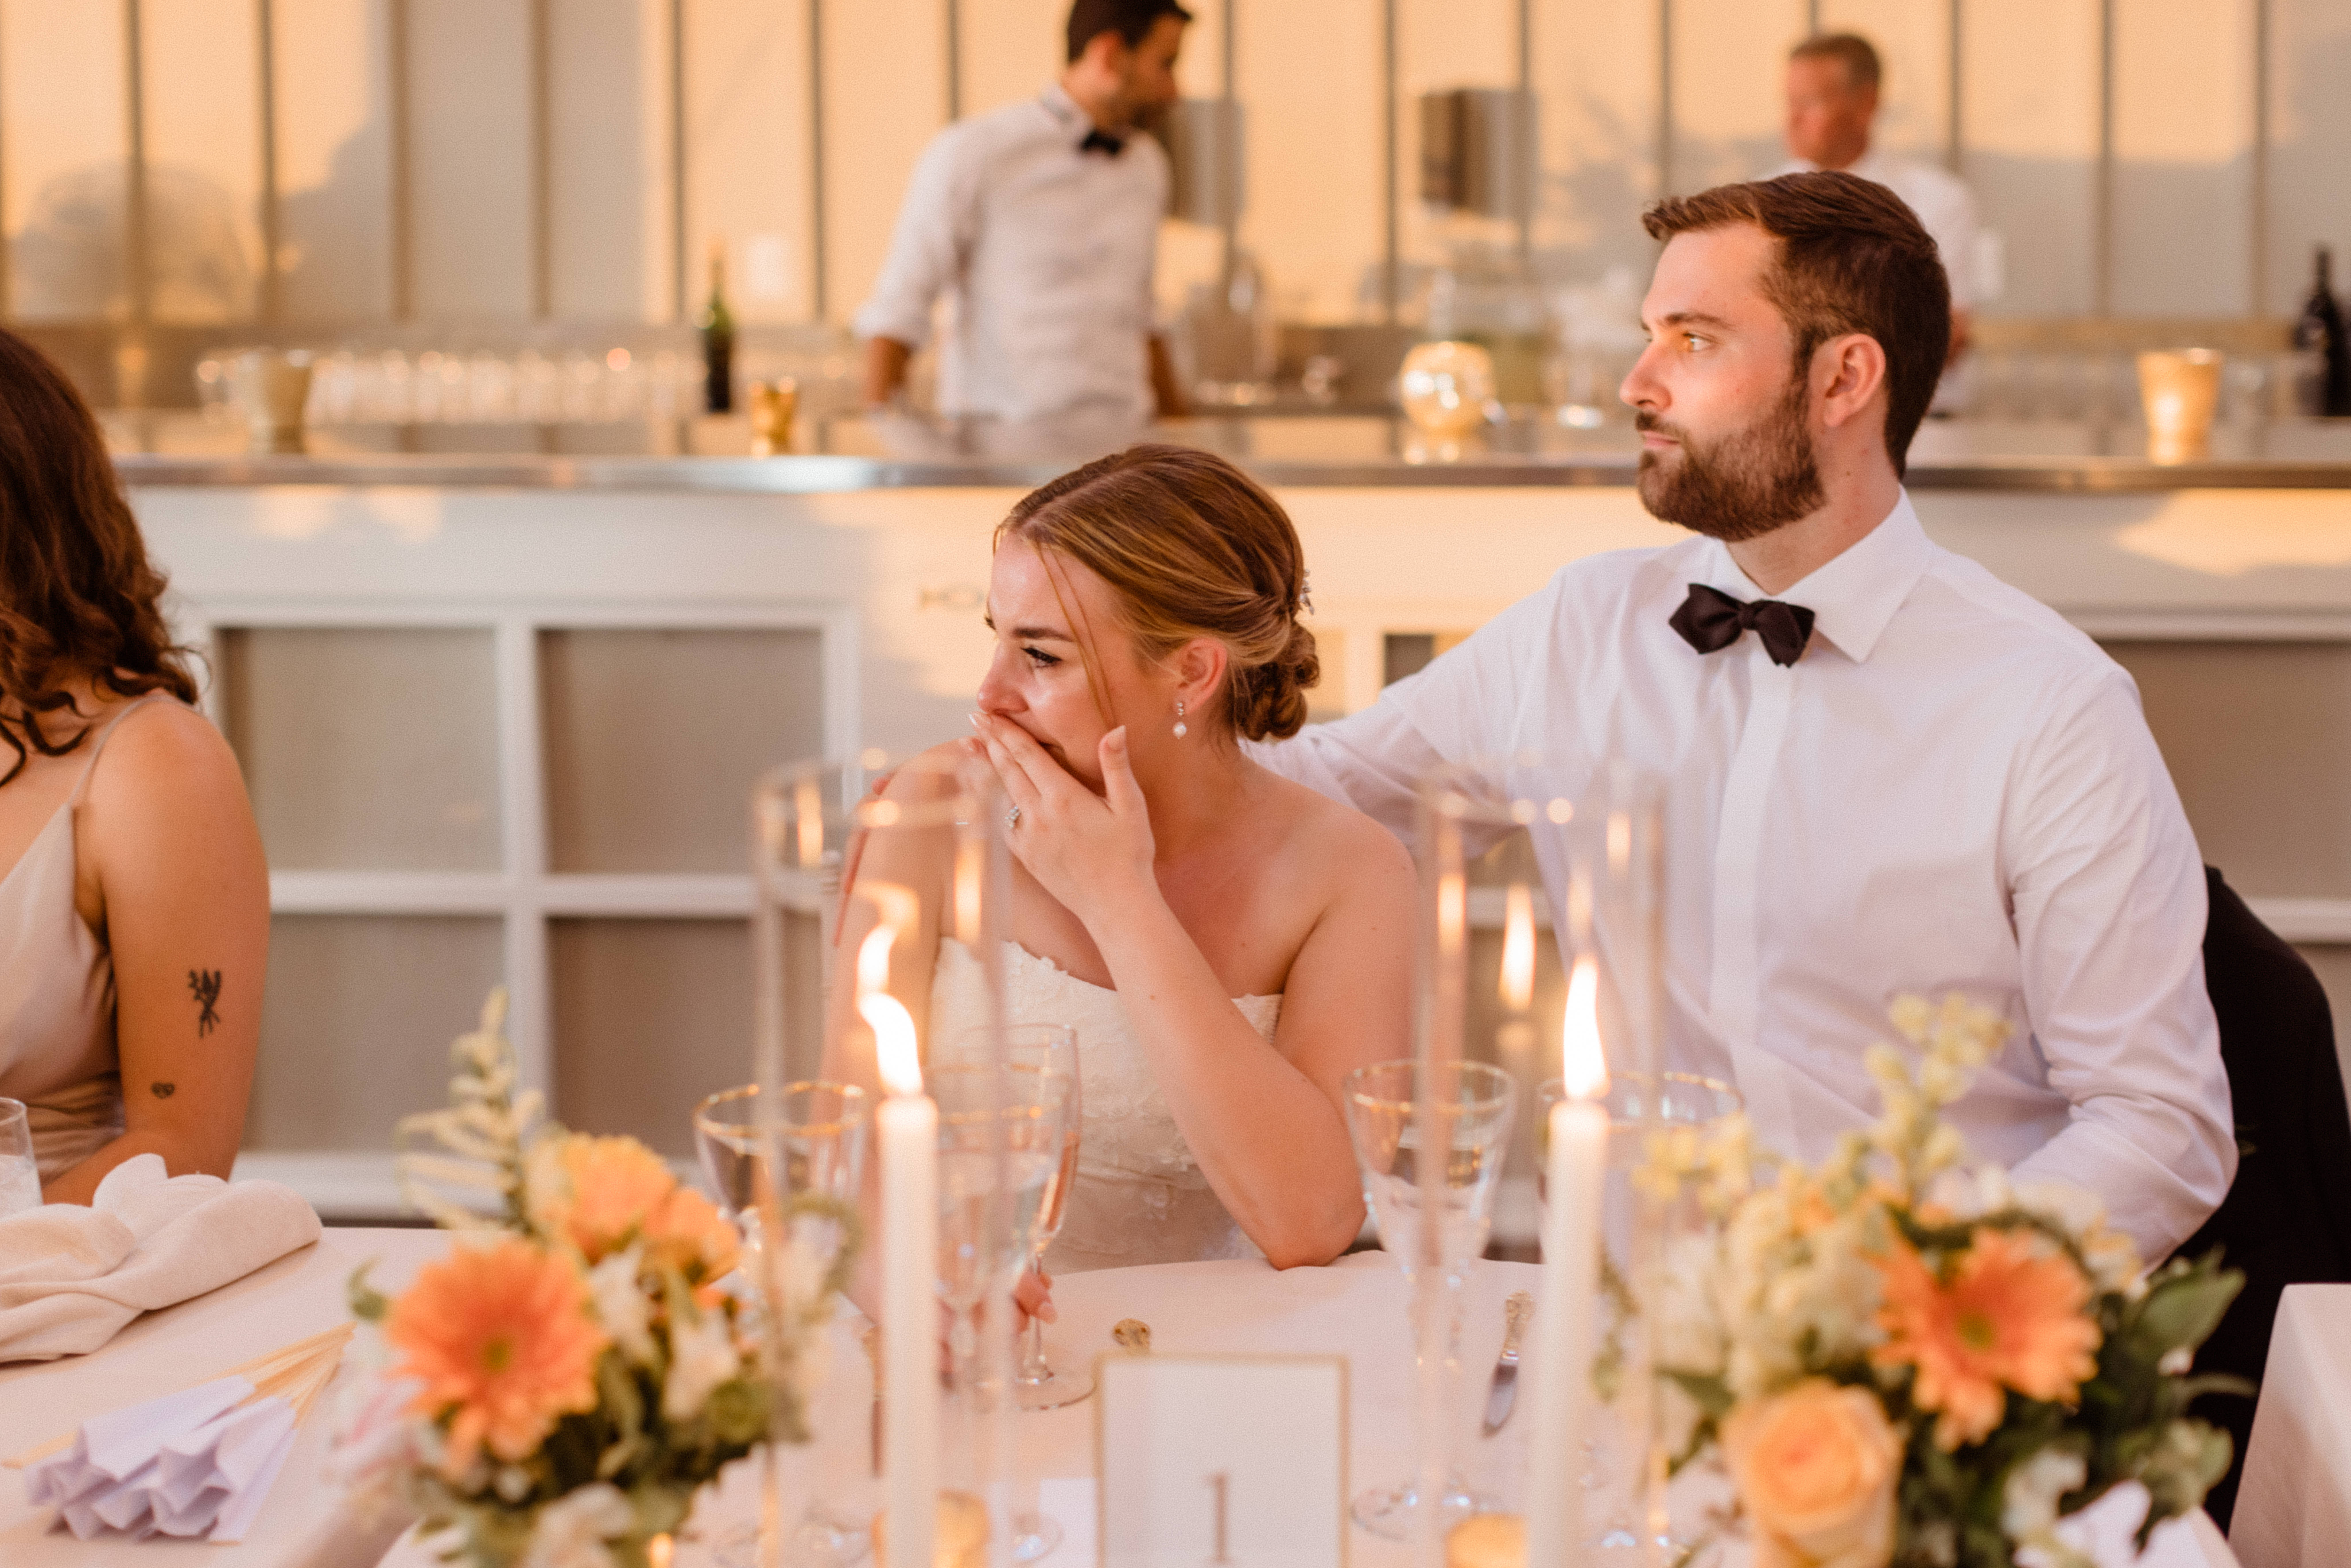 Bride and groom look on as their wedding party gives emotional toasts